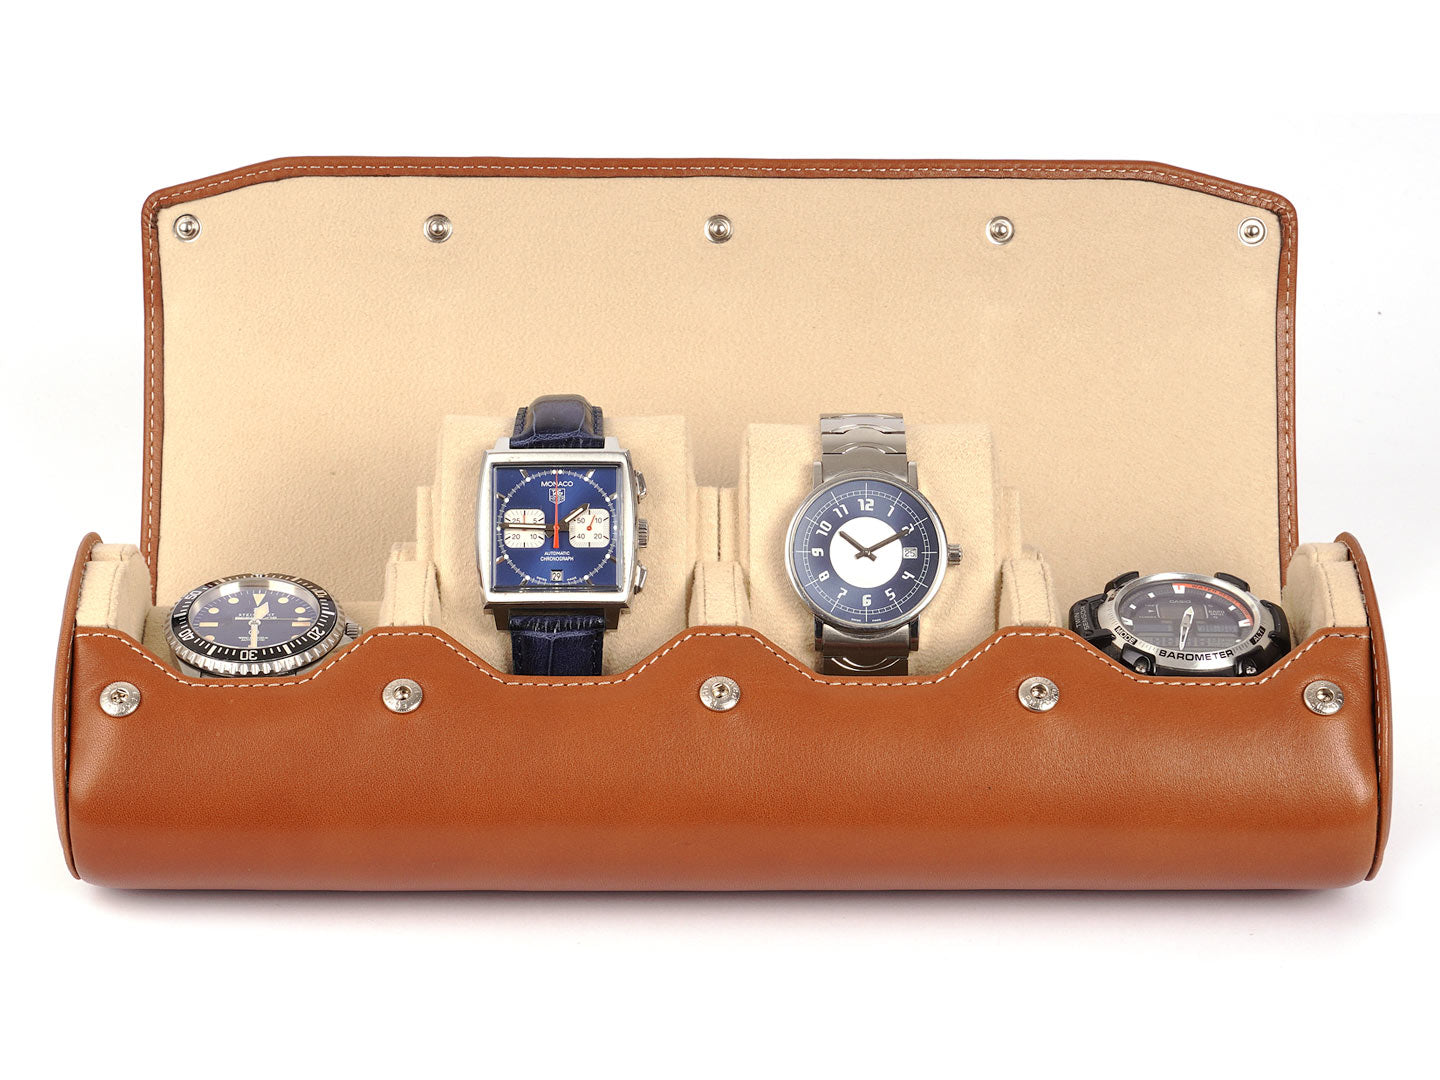 Watch Roll for 6 Watches - Tan - Smooth Leather